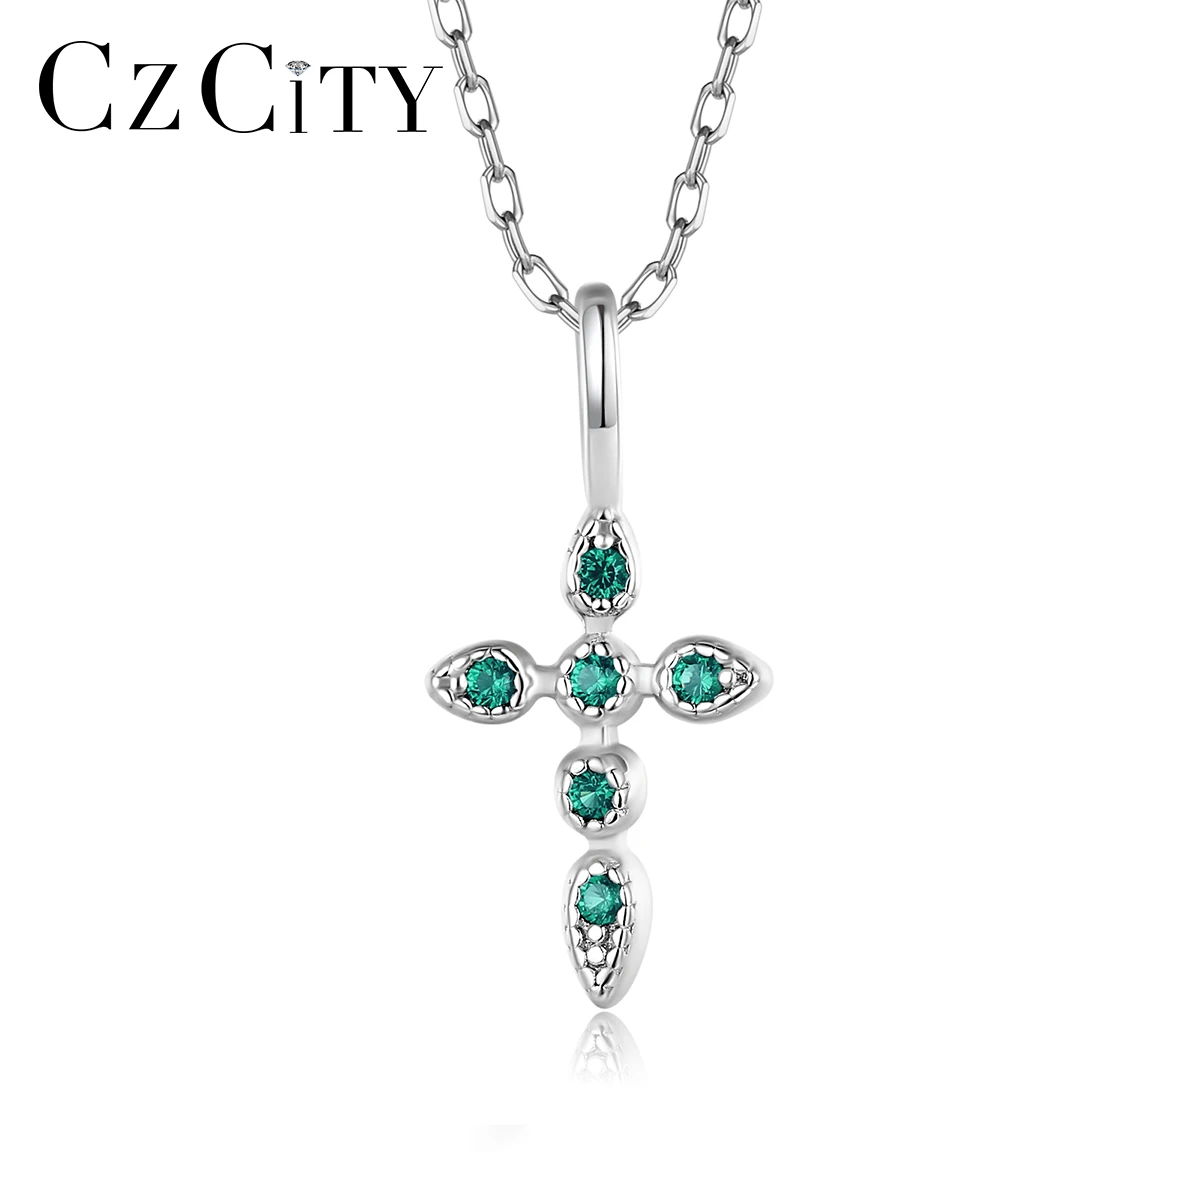 

CZCITY Round Green Cubic Zirconia Cross Shape S925 Sterling Silver Necklace for Women Original Design Certified Hip Hop Jewelry